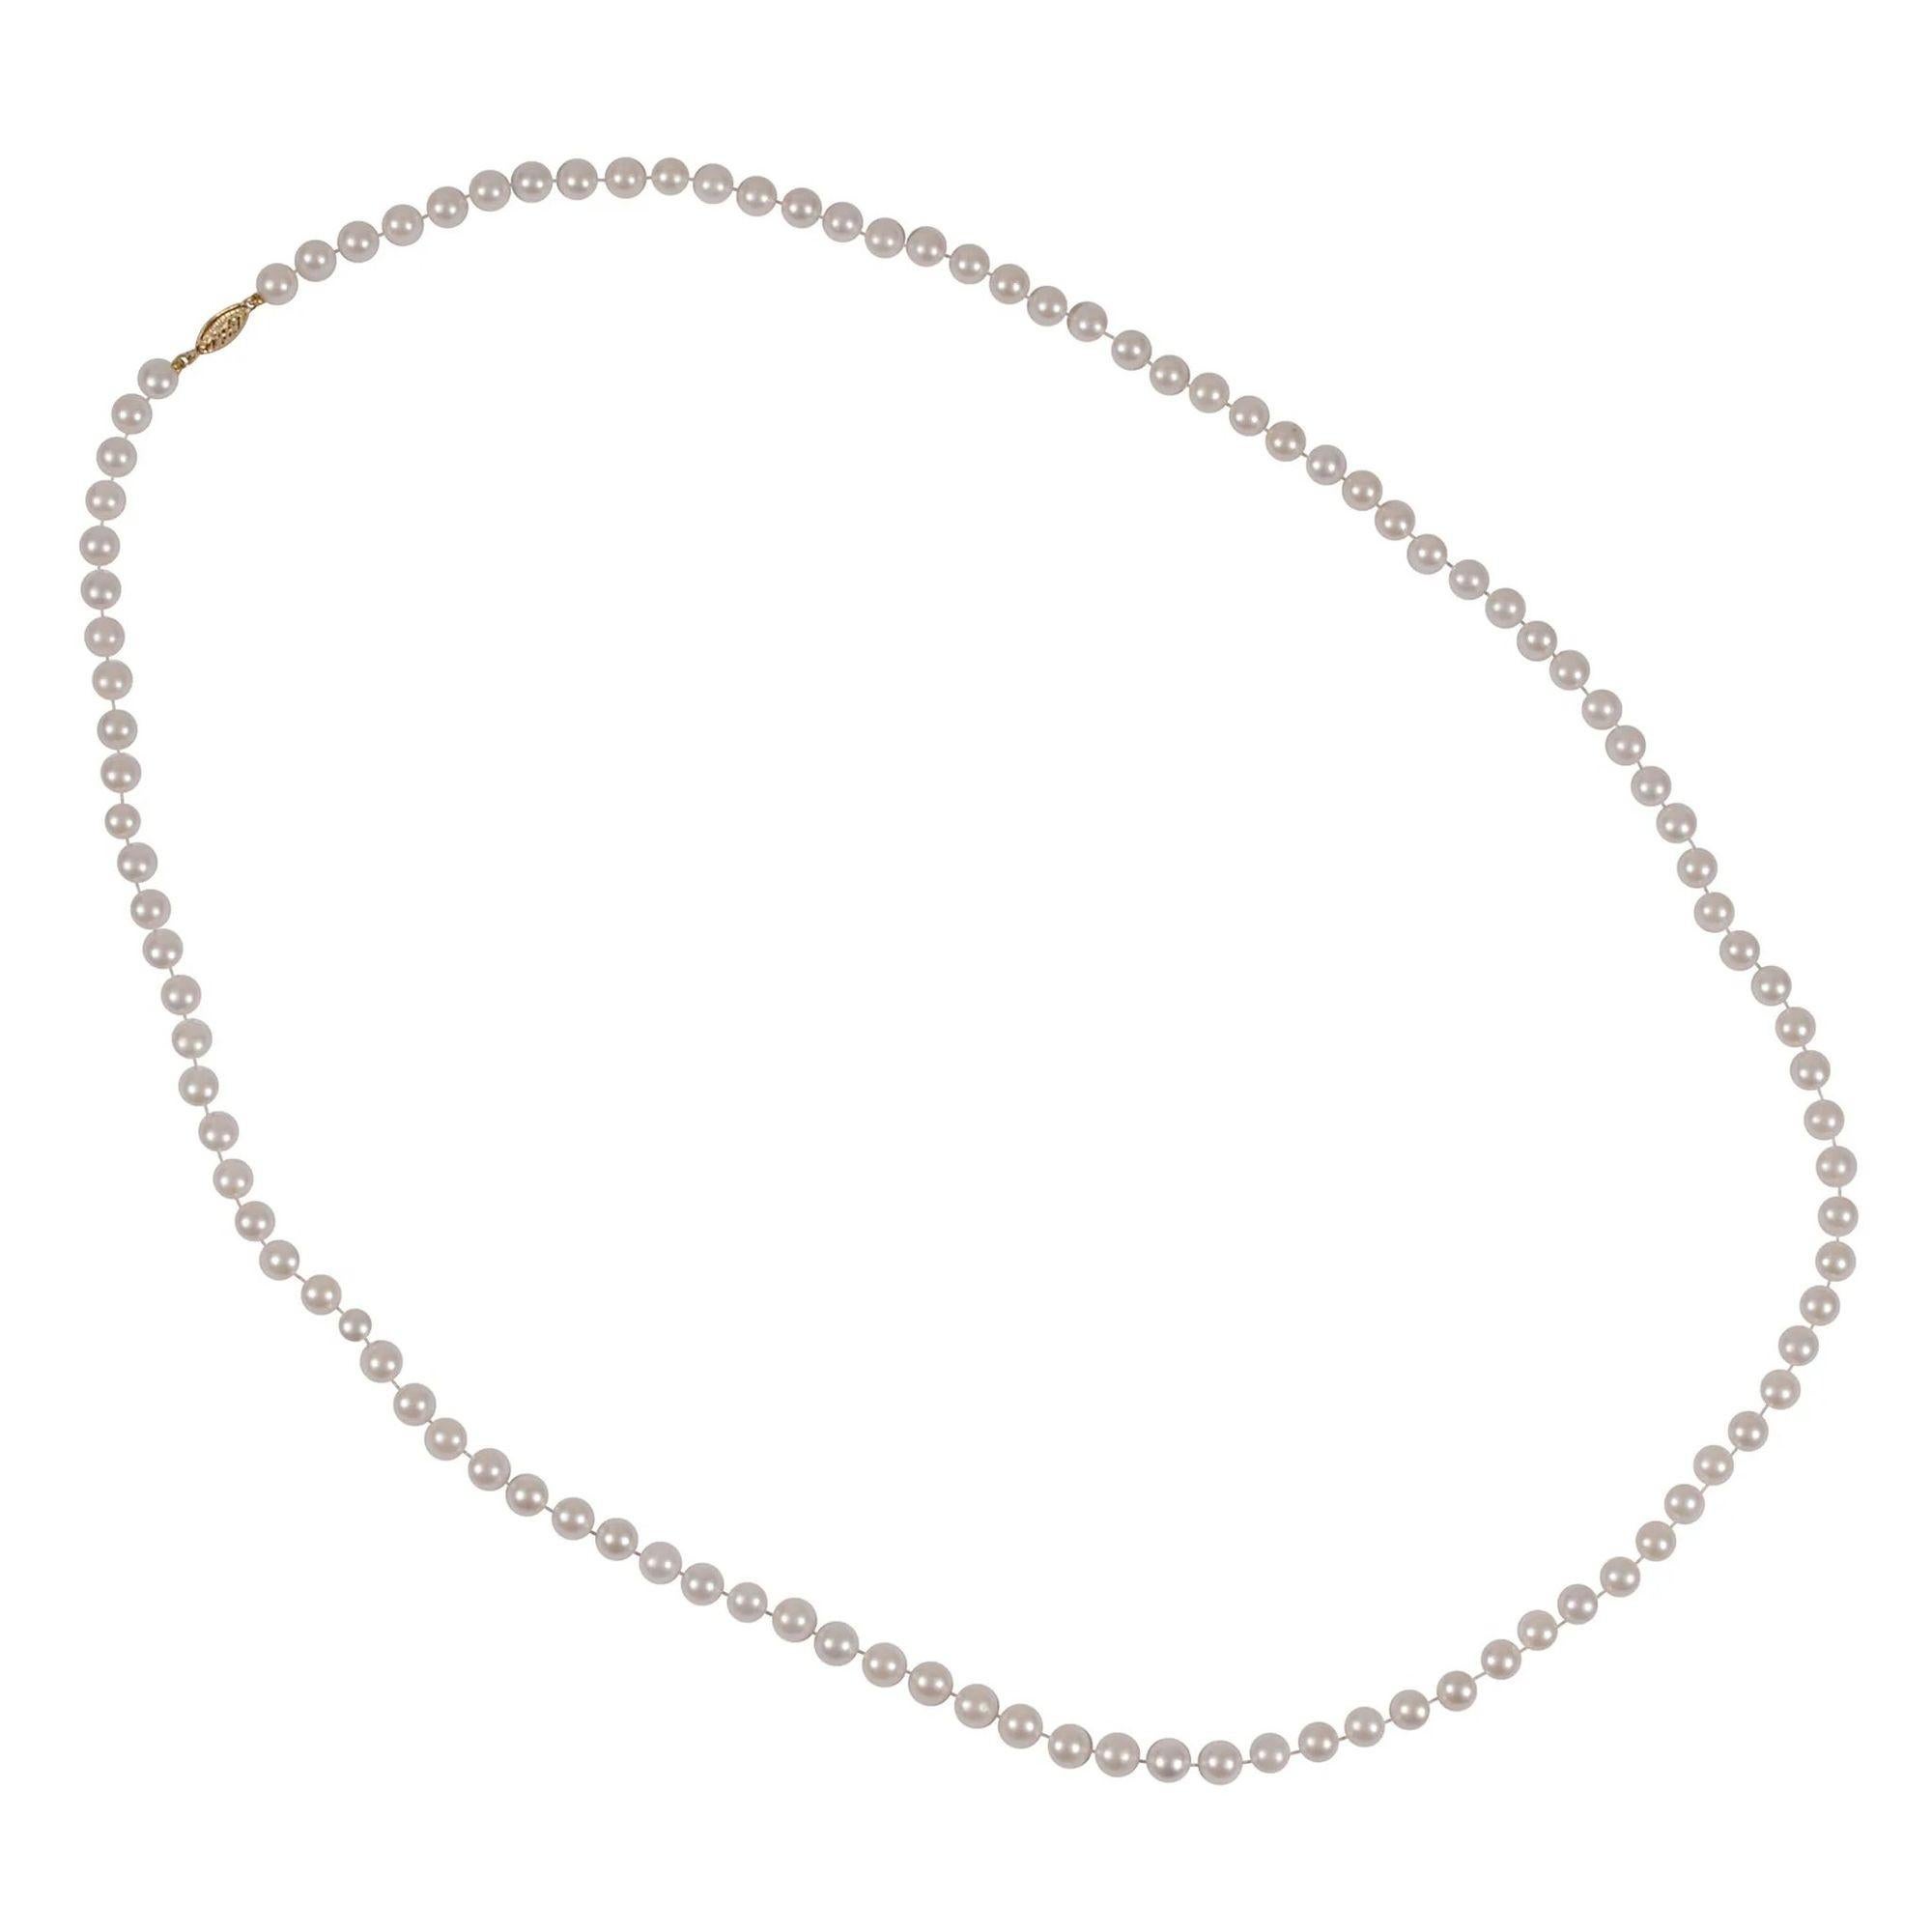 Estate 32 inch cultured pearl necklace. This necklace features cultured pearls measuring 6.5-7mm. The pearl necklace has a 14 karat yellow gold clasp. [SJ SAUC9097 P]

Dimensions
32″L